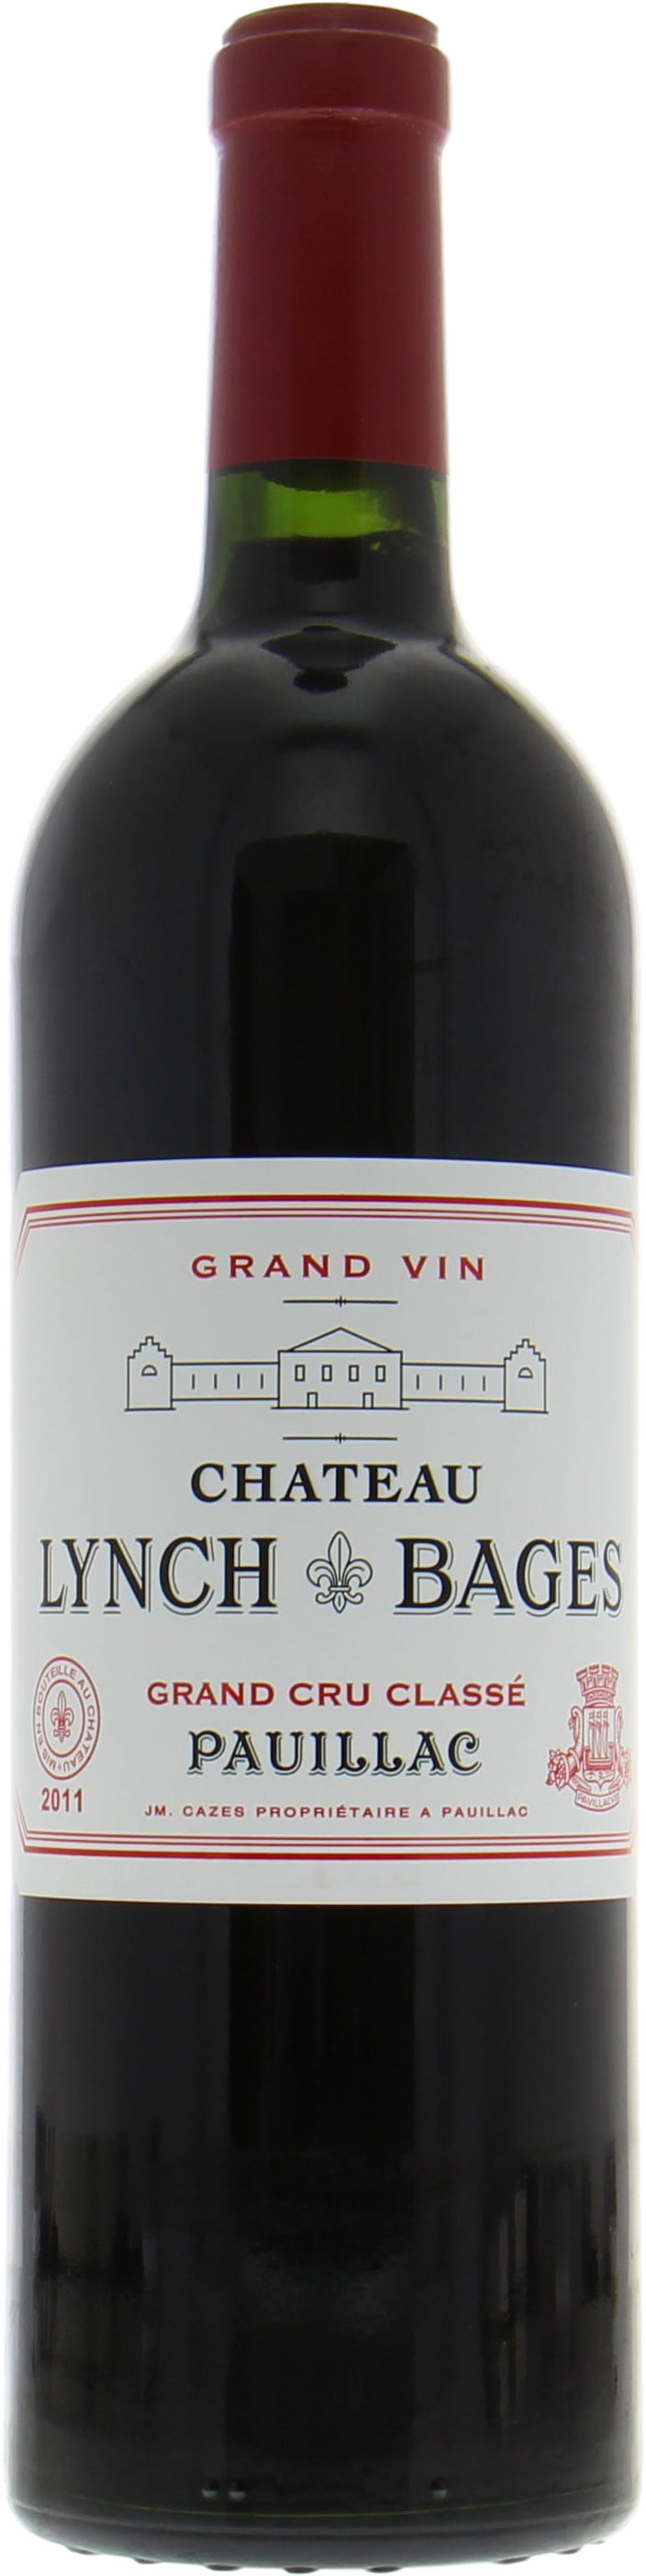 Chateau Lynch Bages - Chateau Lynch Bages 2011 Perfect